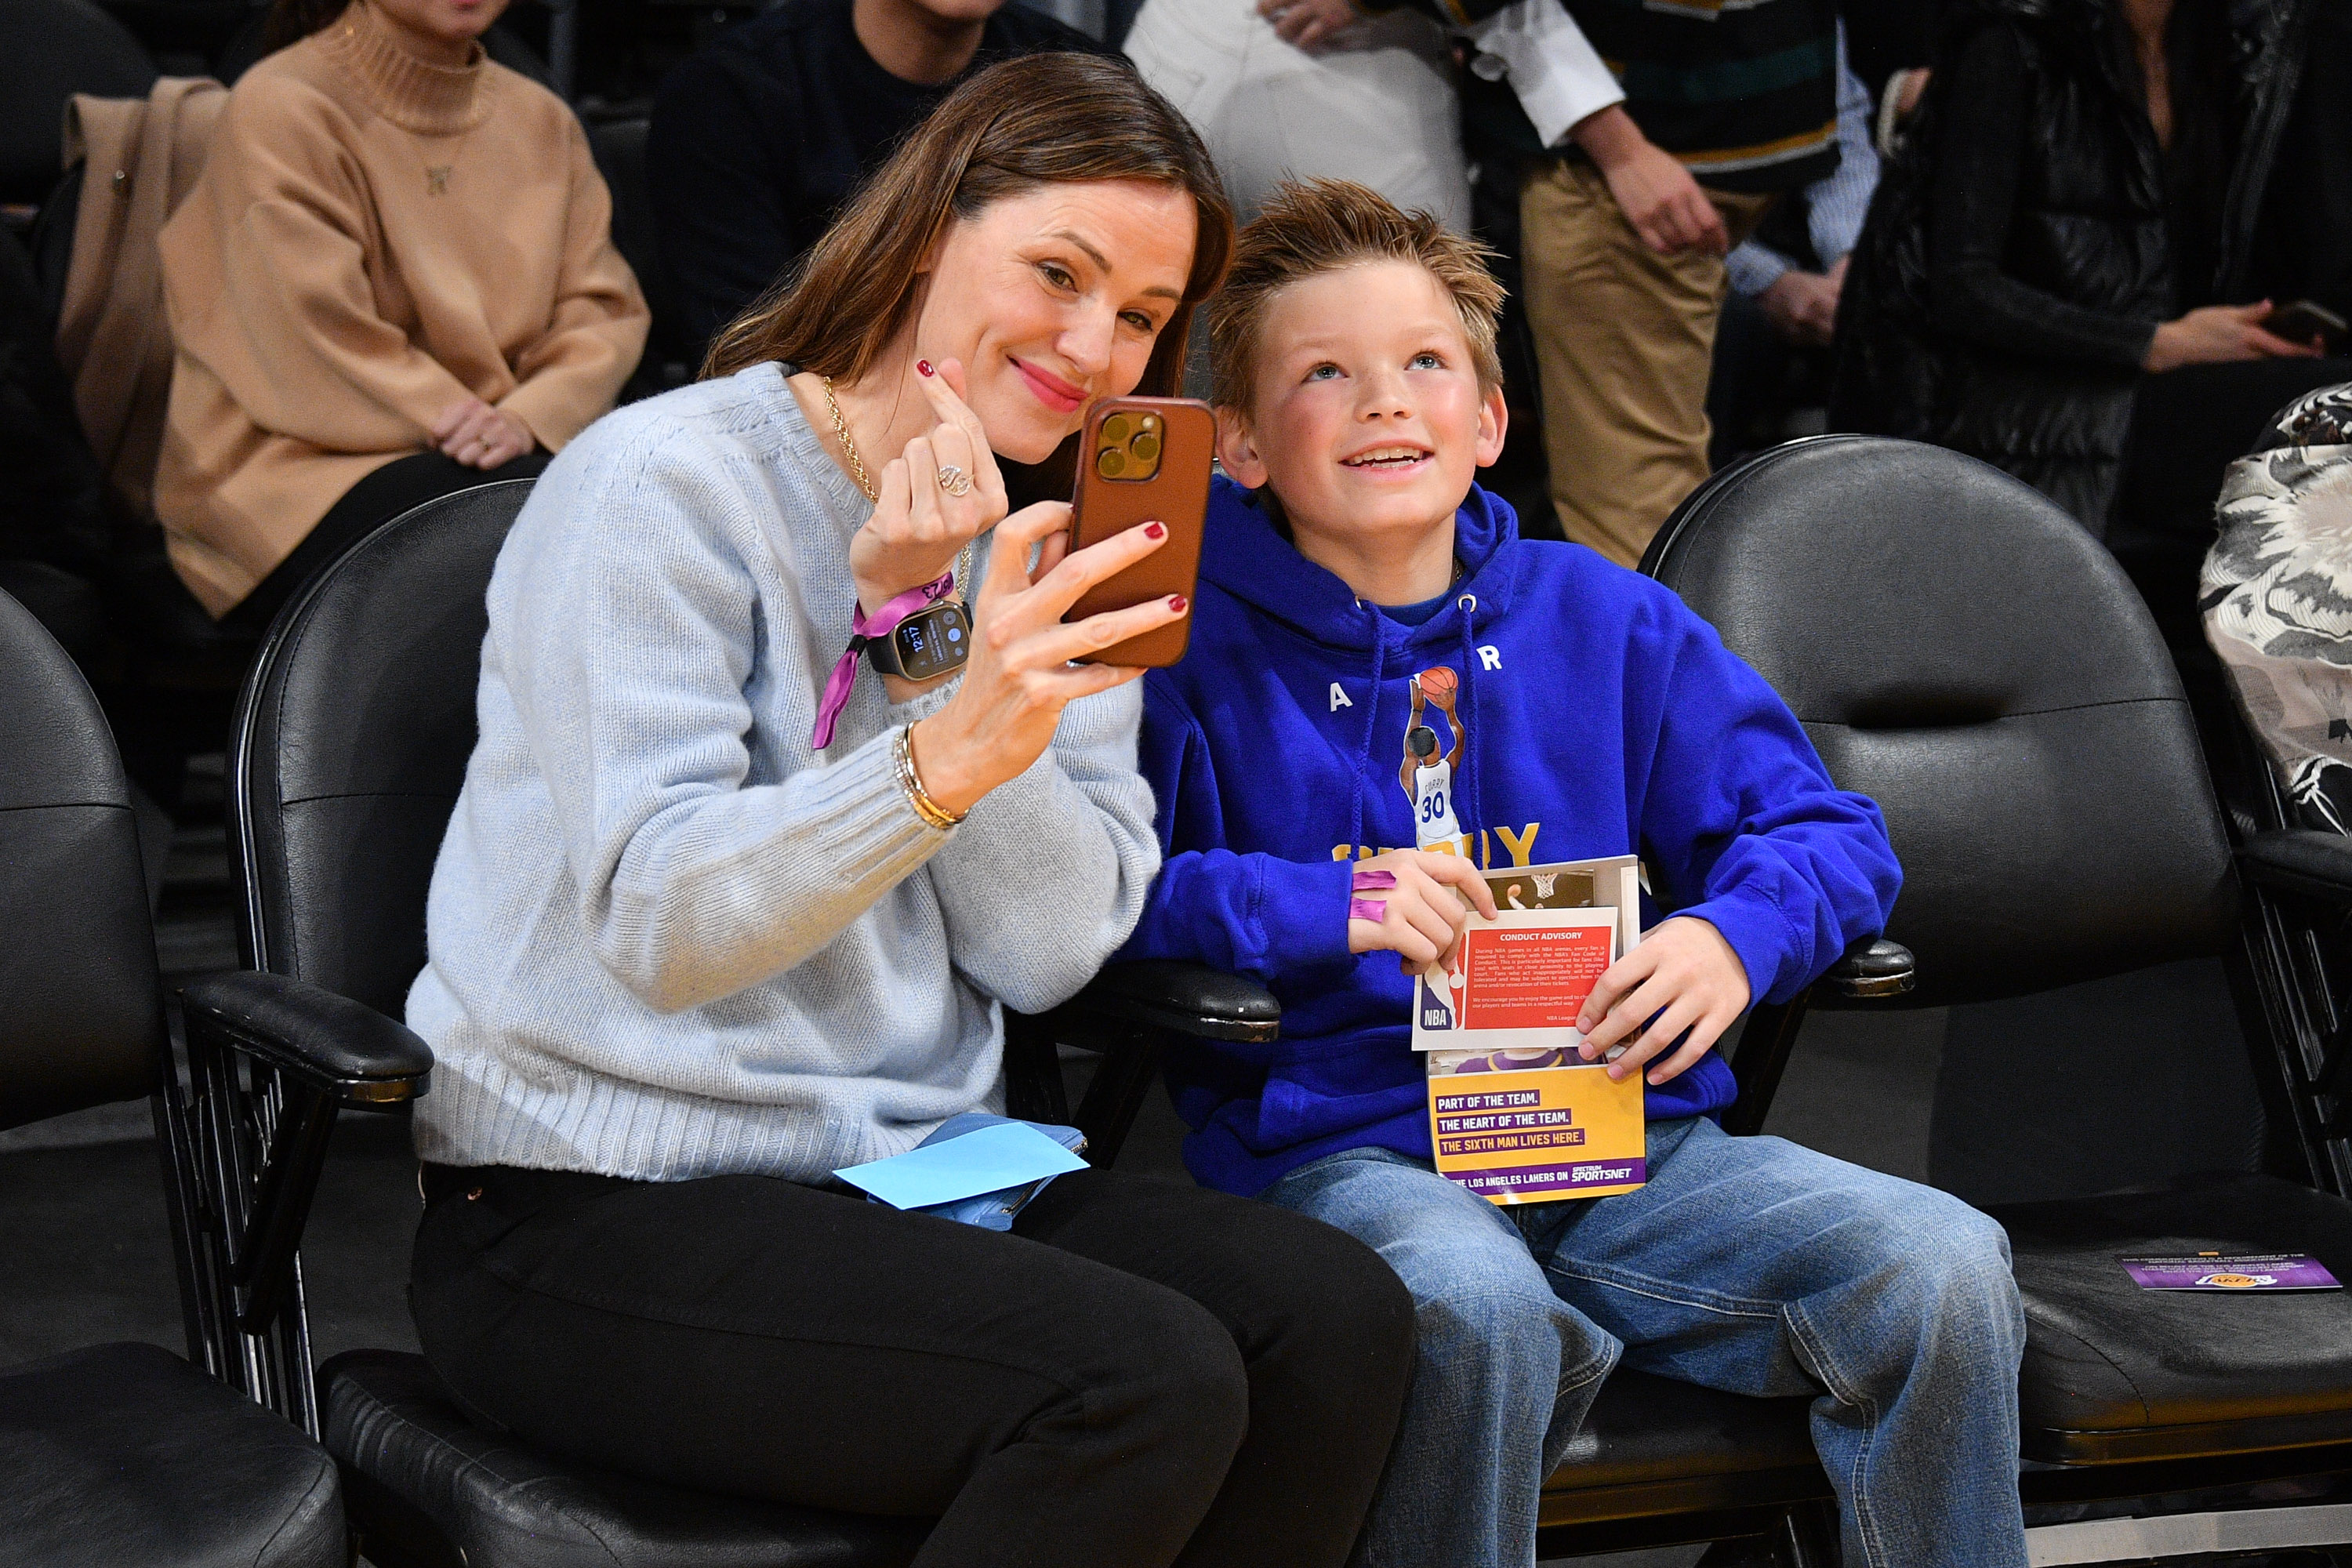 Jennifer Garner and Samuel Garner Affleck attend a basketball game between the Los Angeles Lakers and the Golden State Warriors at Crypto.com Arena on March 5, 2023, in Los Angeles, California. | Source: Getty Images